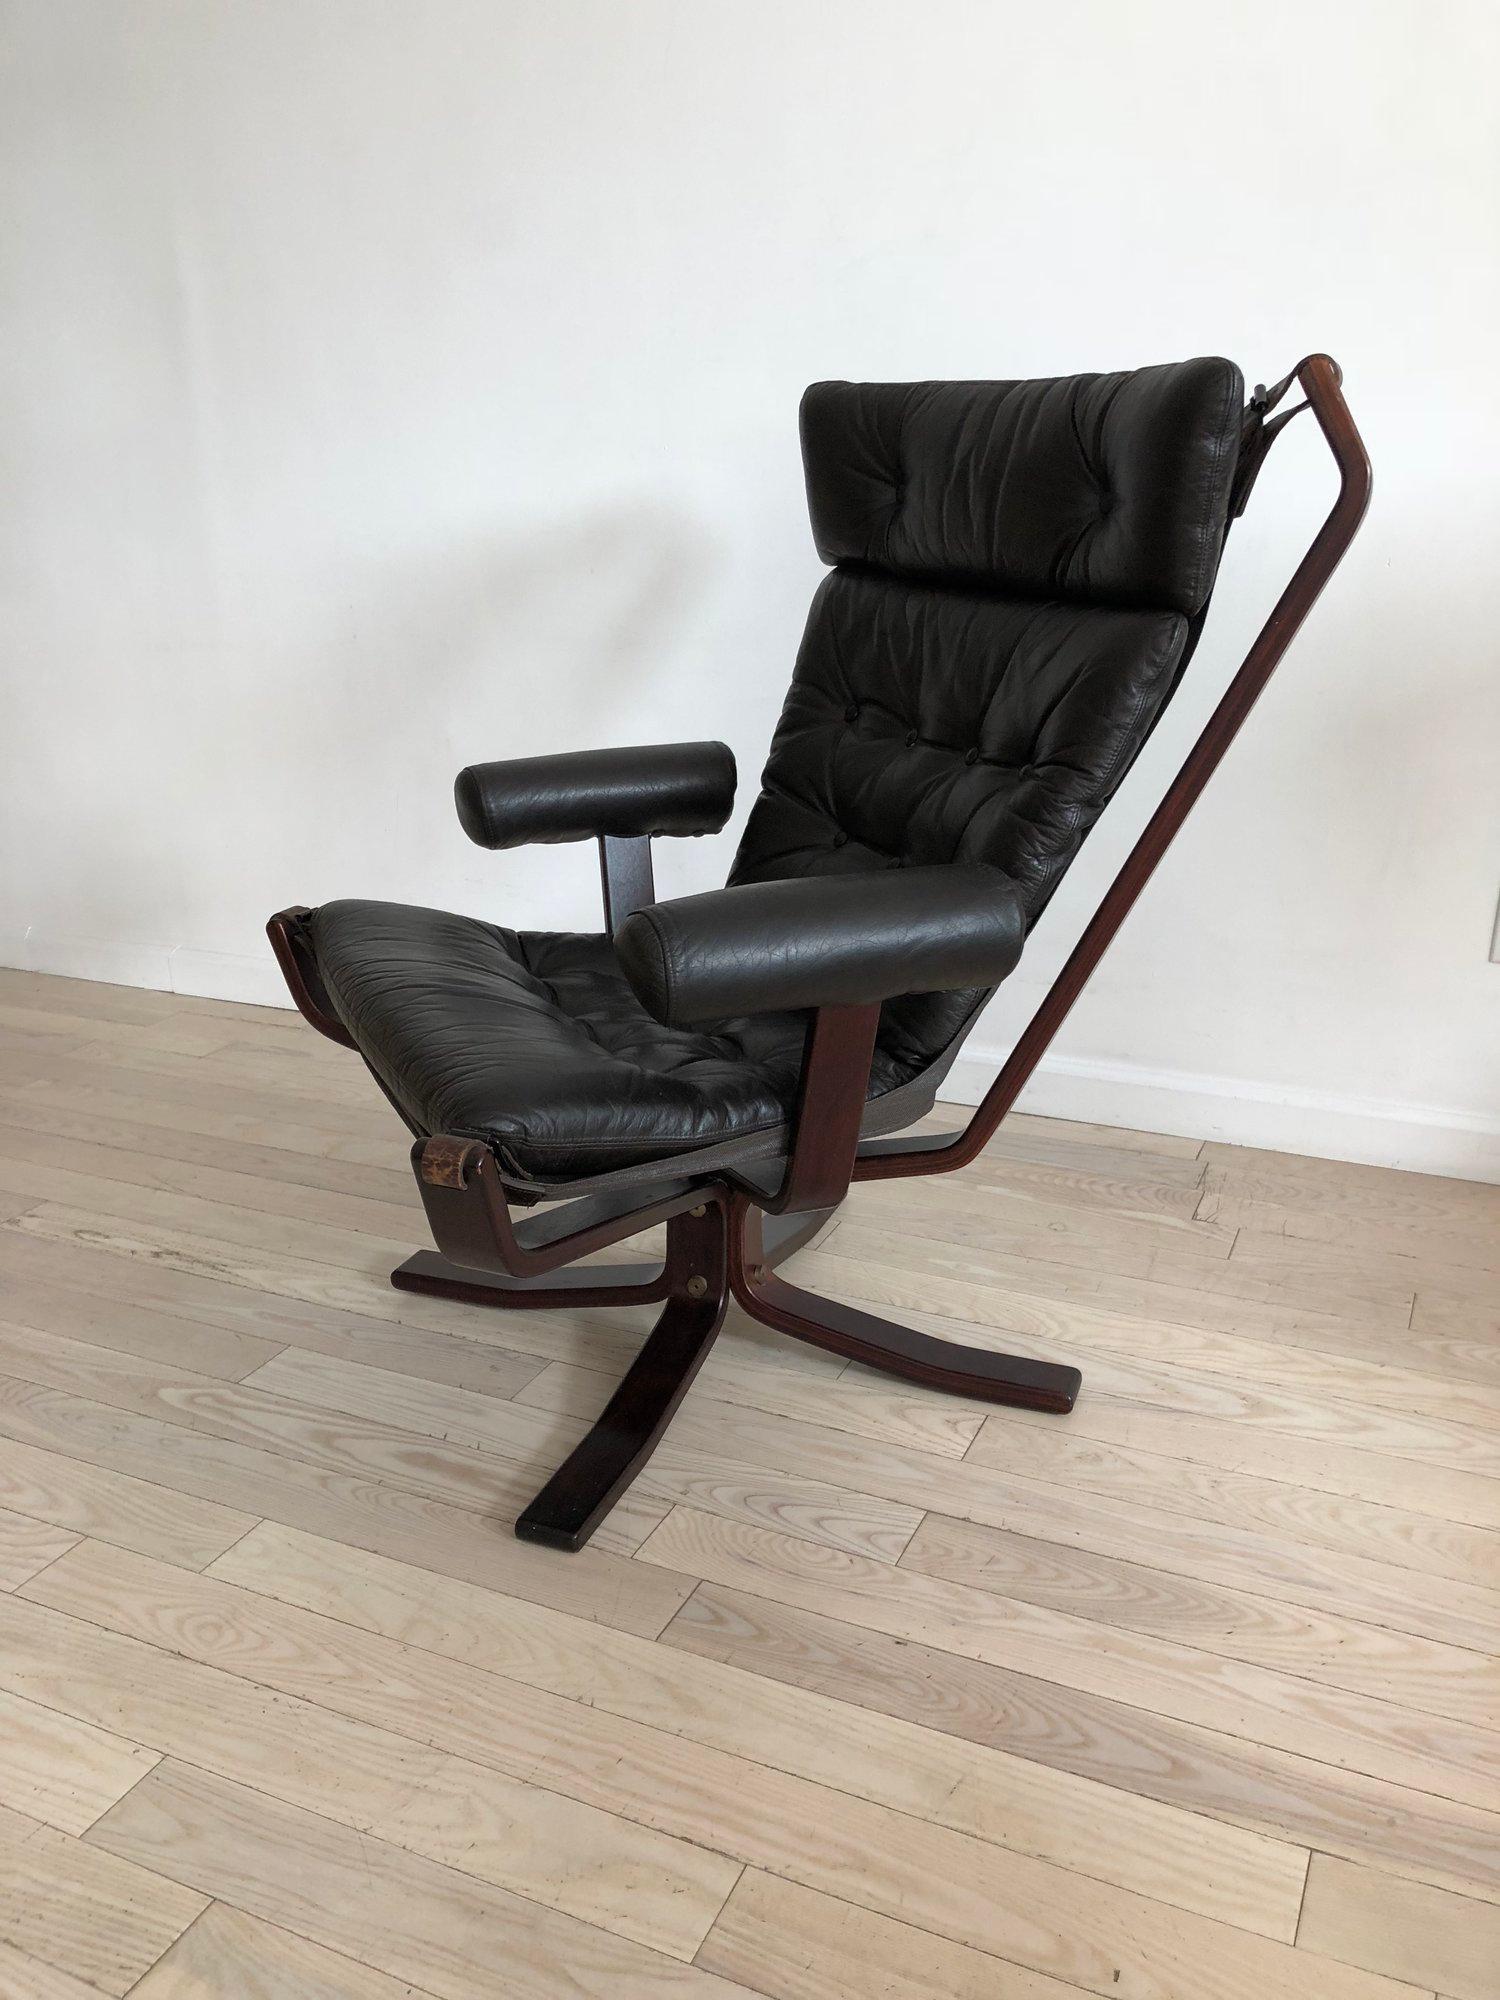 Armed 1960s rosewood and leather falcon style chair after Sigurd Ressell made in Norway. Ultra comfortable, the chair you never want to get out of. Perfect vintage condition. Zipper attached leather cushions and leather straps. 

Measures: 31” wide